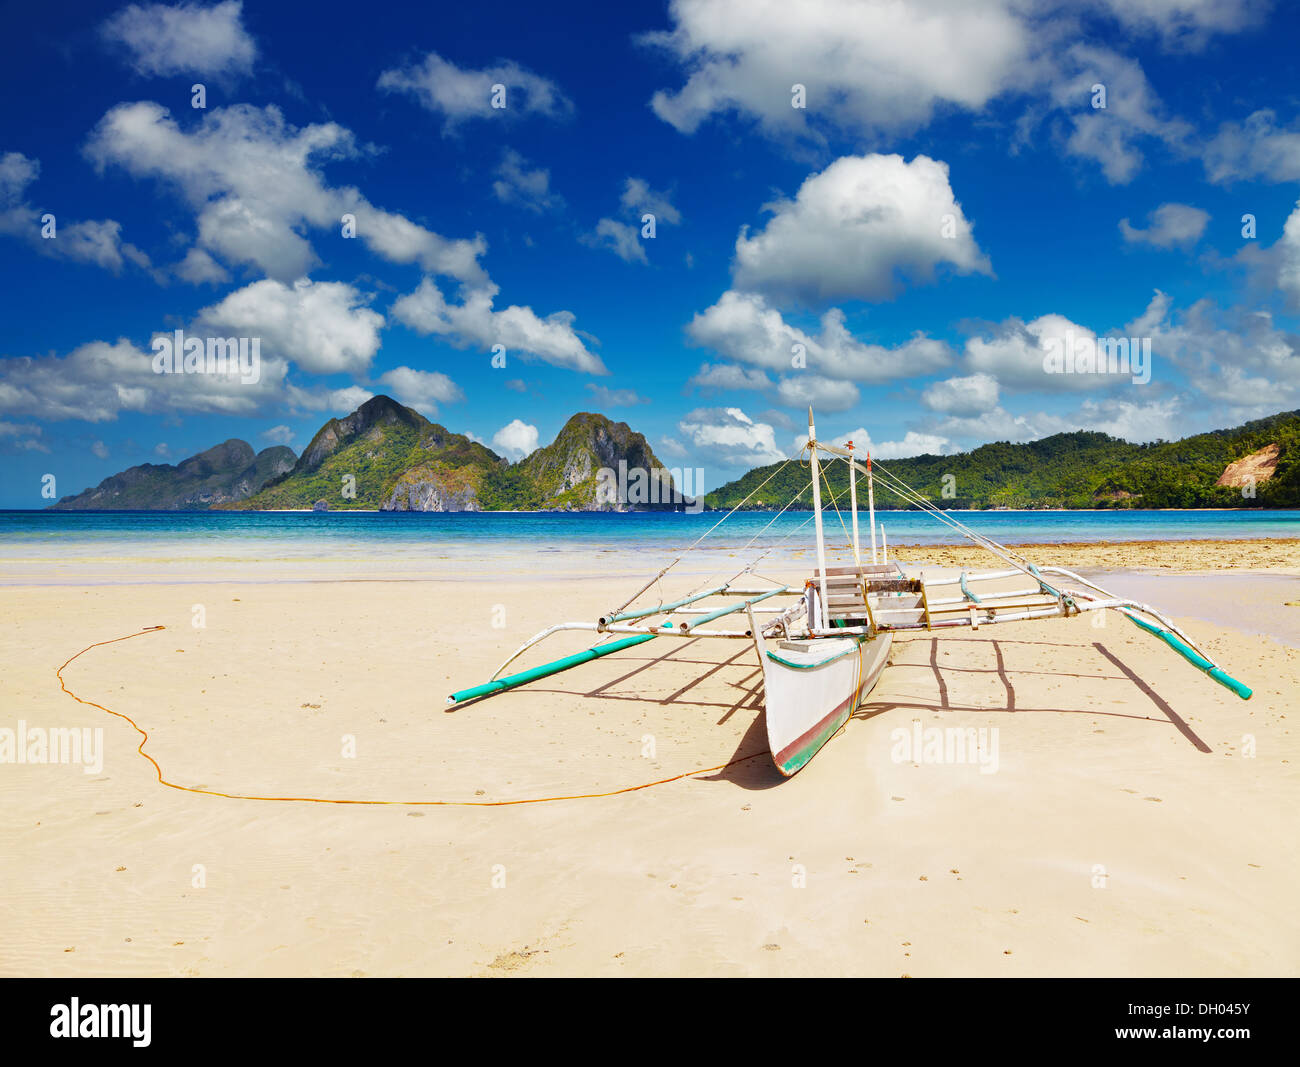 Tropical beach at low tide, El Nido, Philippines Stock Photo